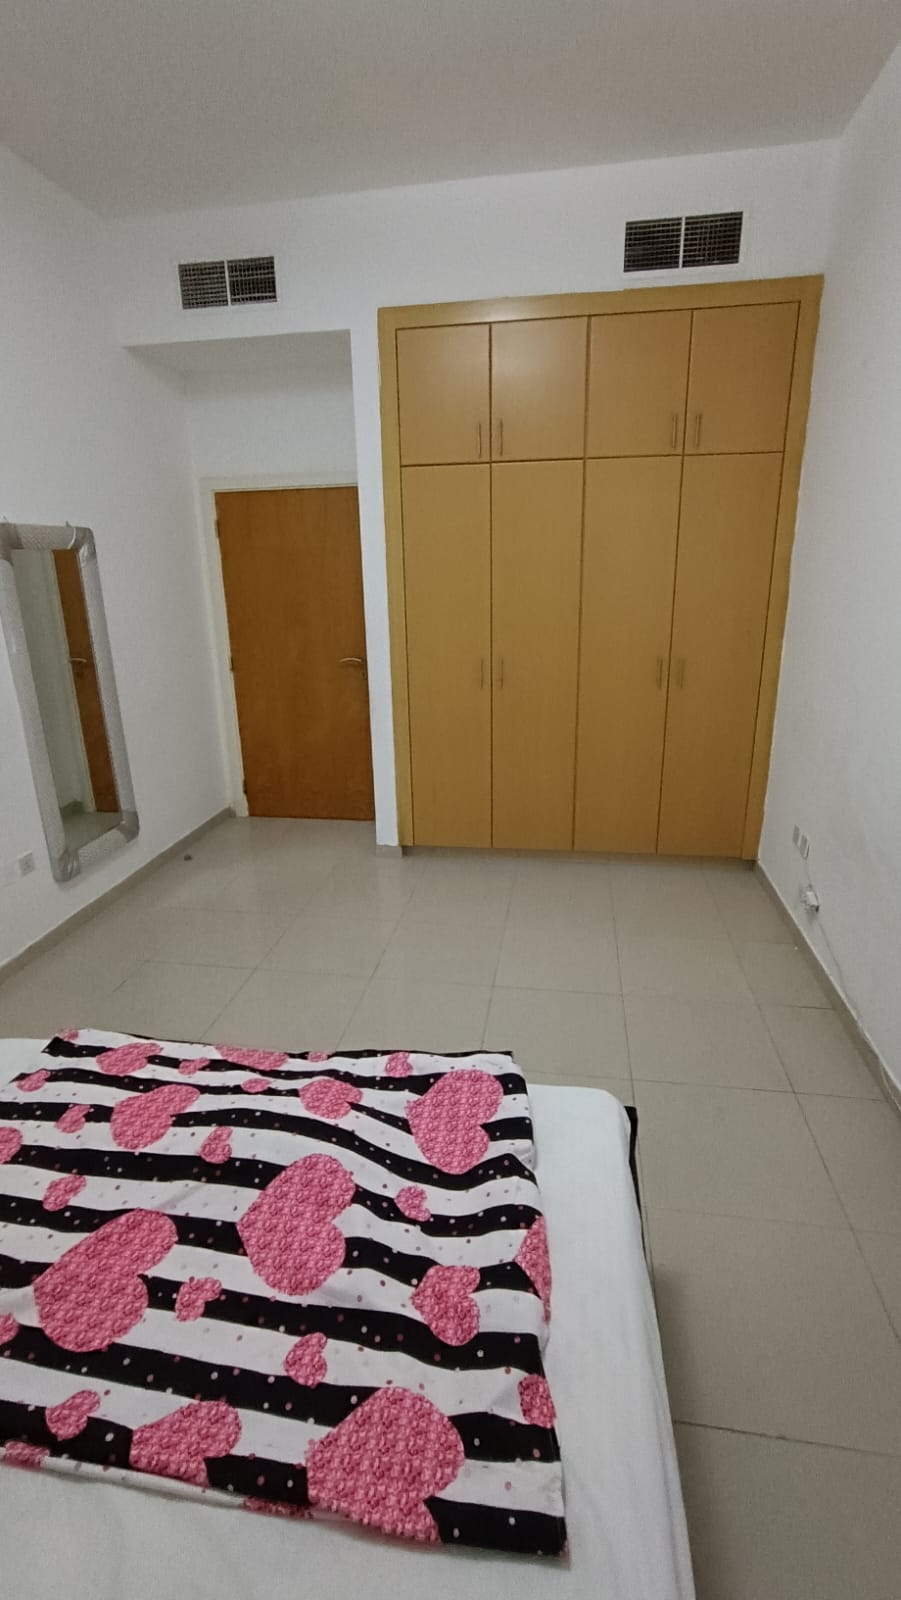 Big Bedroom With Build In Cabinet, Window And Sharing 2 Bathroom, And Furnished All Included